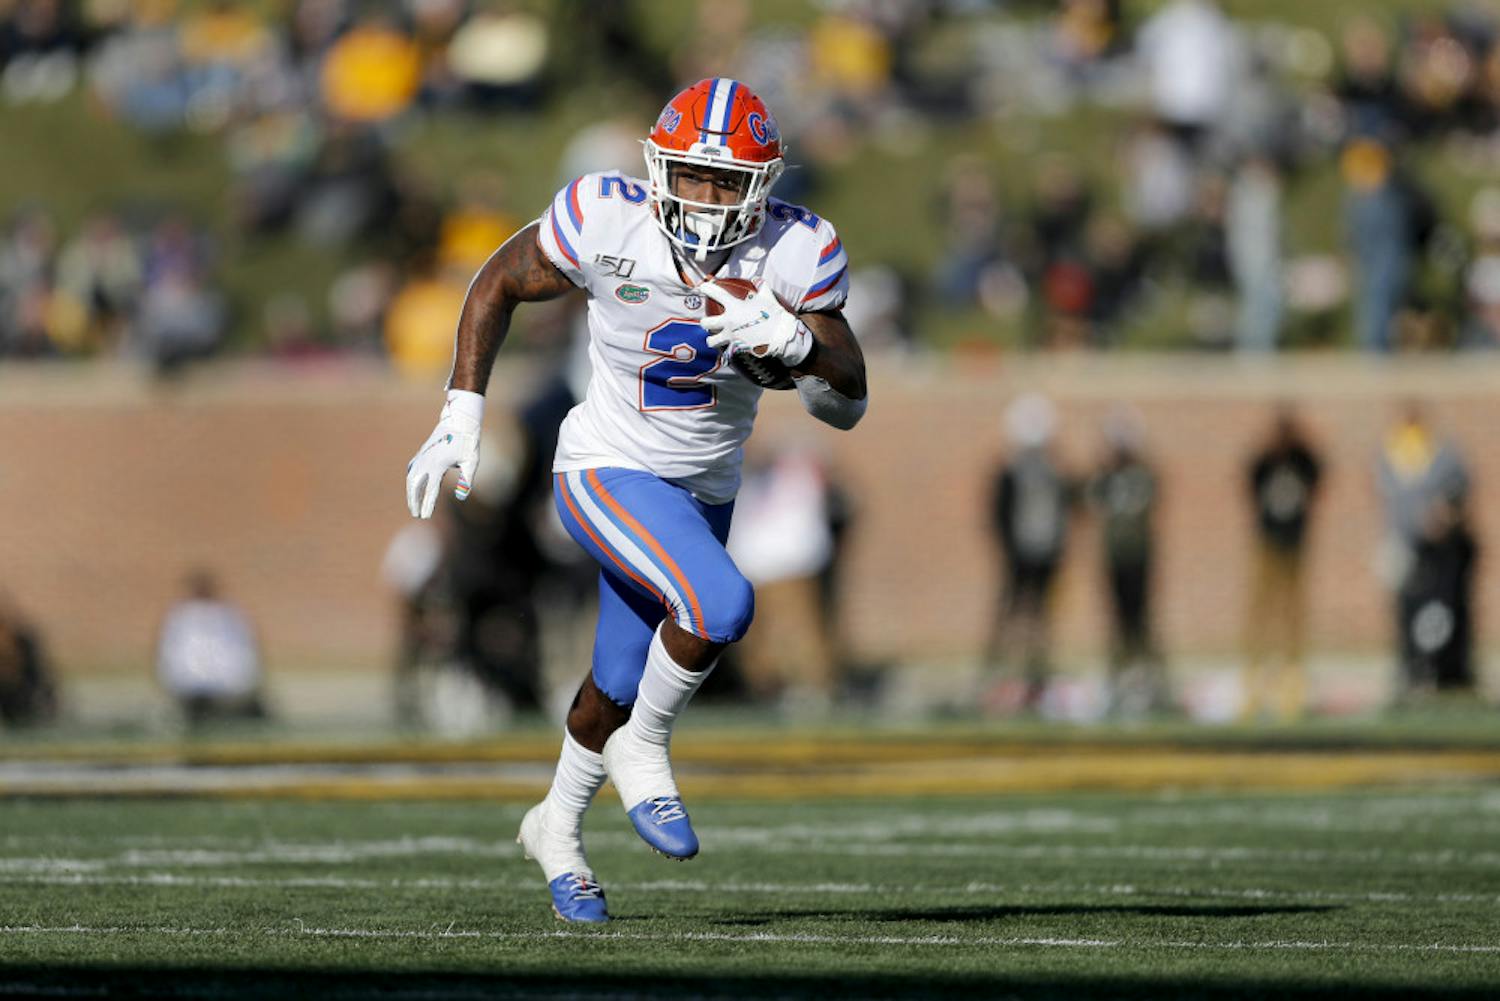 Florida running back Lamical Perine carries the ball for a first down during the second half of an NCAA college football game against Missouri, Saturday, Nov. 16, 2019, in Columbia, Mo. Florida won 23-6. (AP Photo/Jeff Roberson)